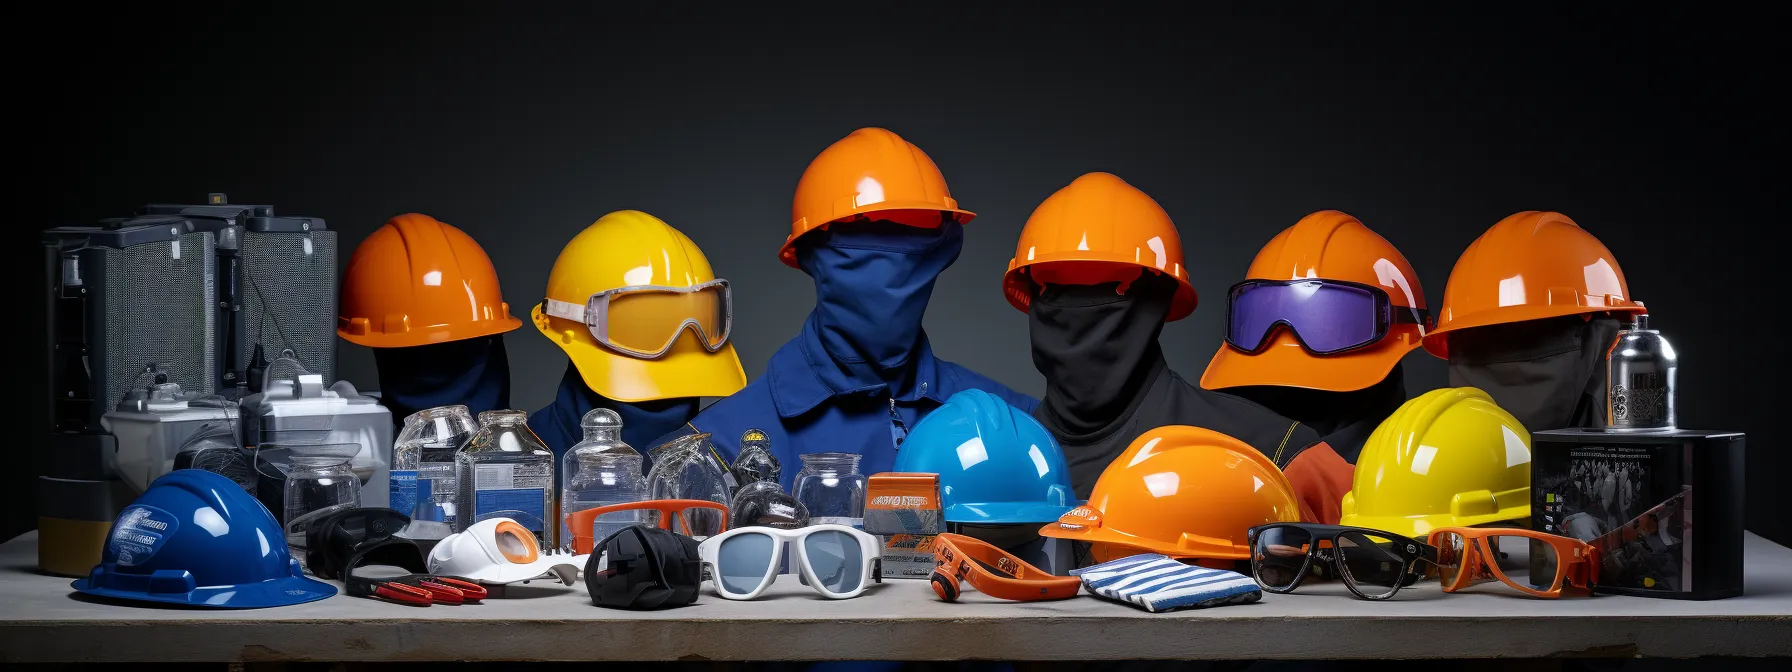 A Collection Of Personal Protective Equipment (Ppe) Including Helmets, Safety Glasses, Masks, Gloves, And Protective Suits Displayed On A Table.